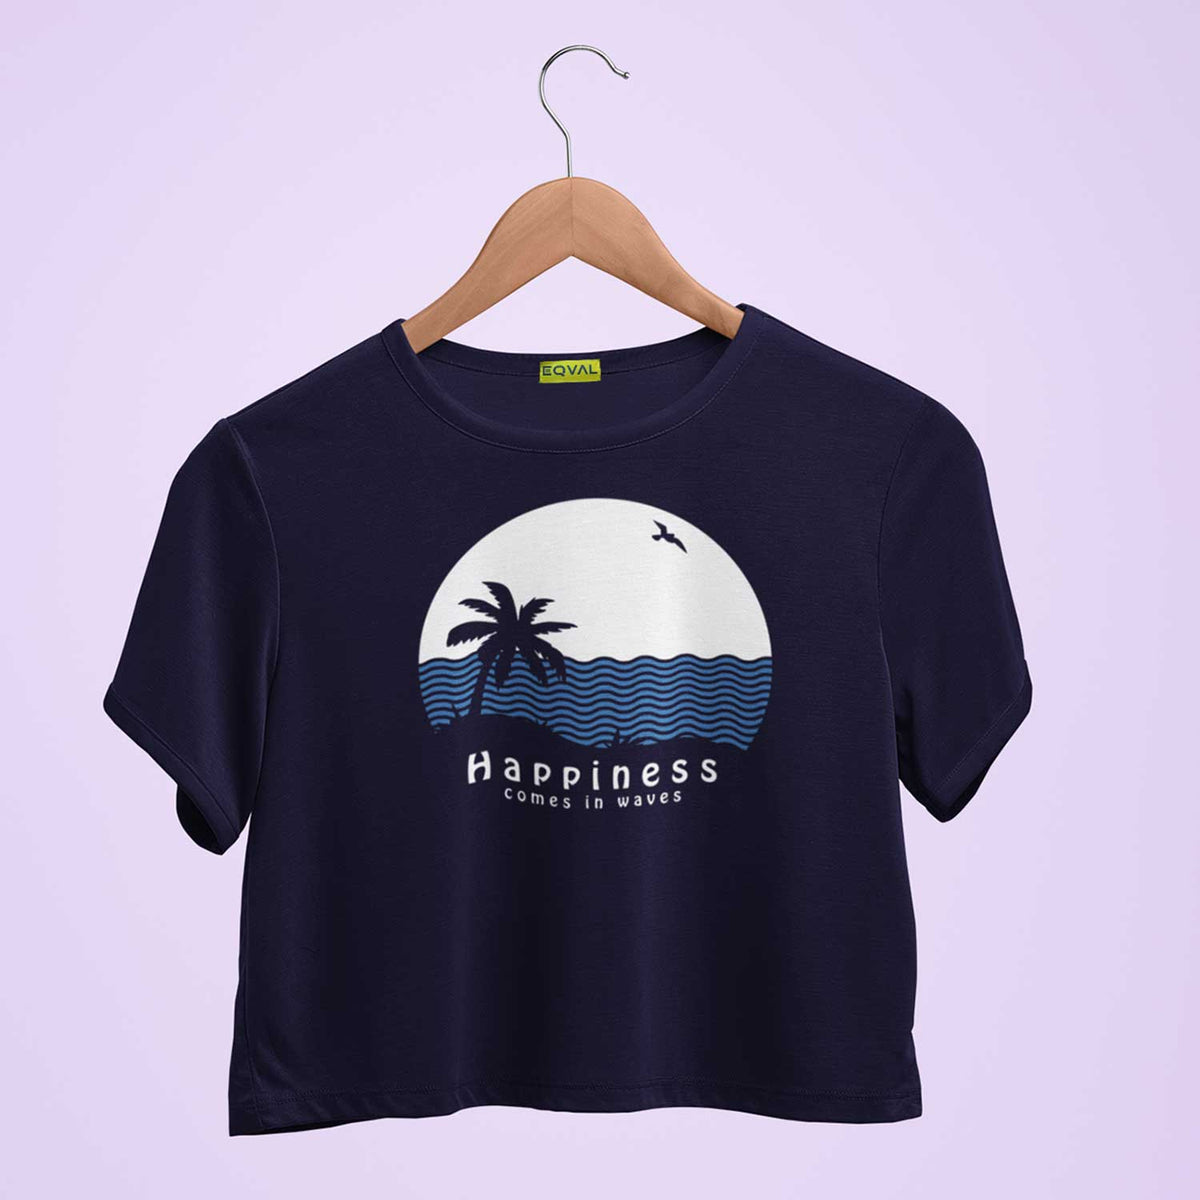 Happiness Printed Crop Top T-shirt